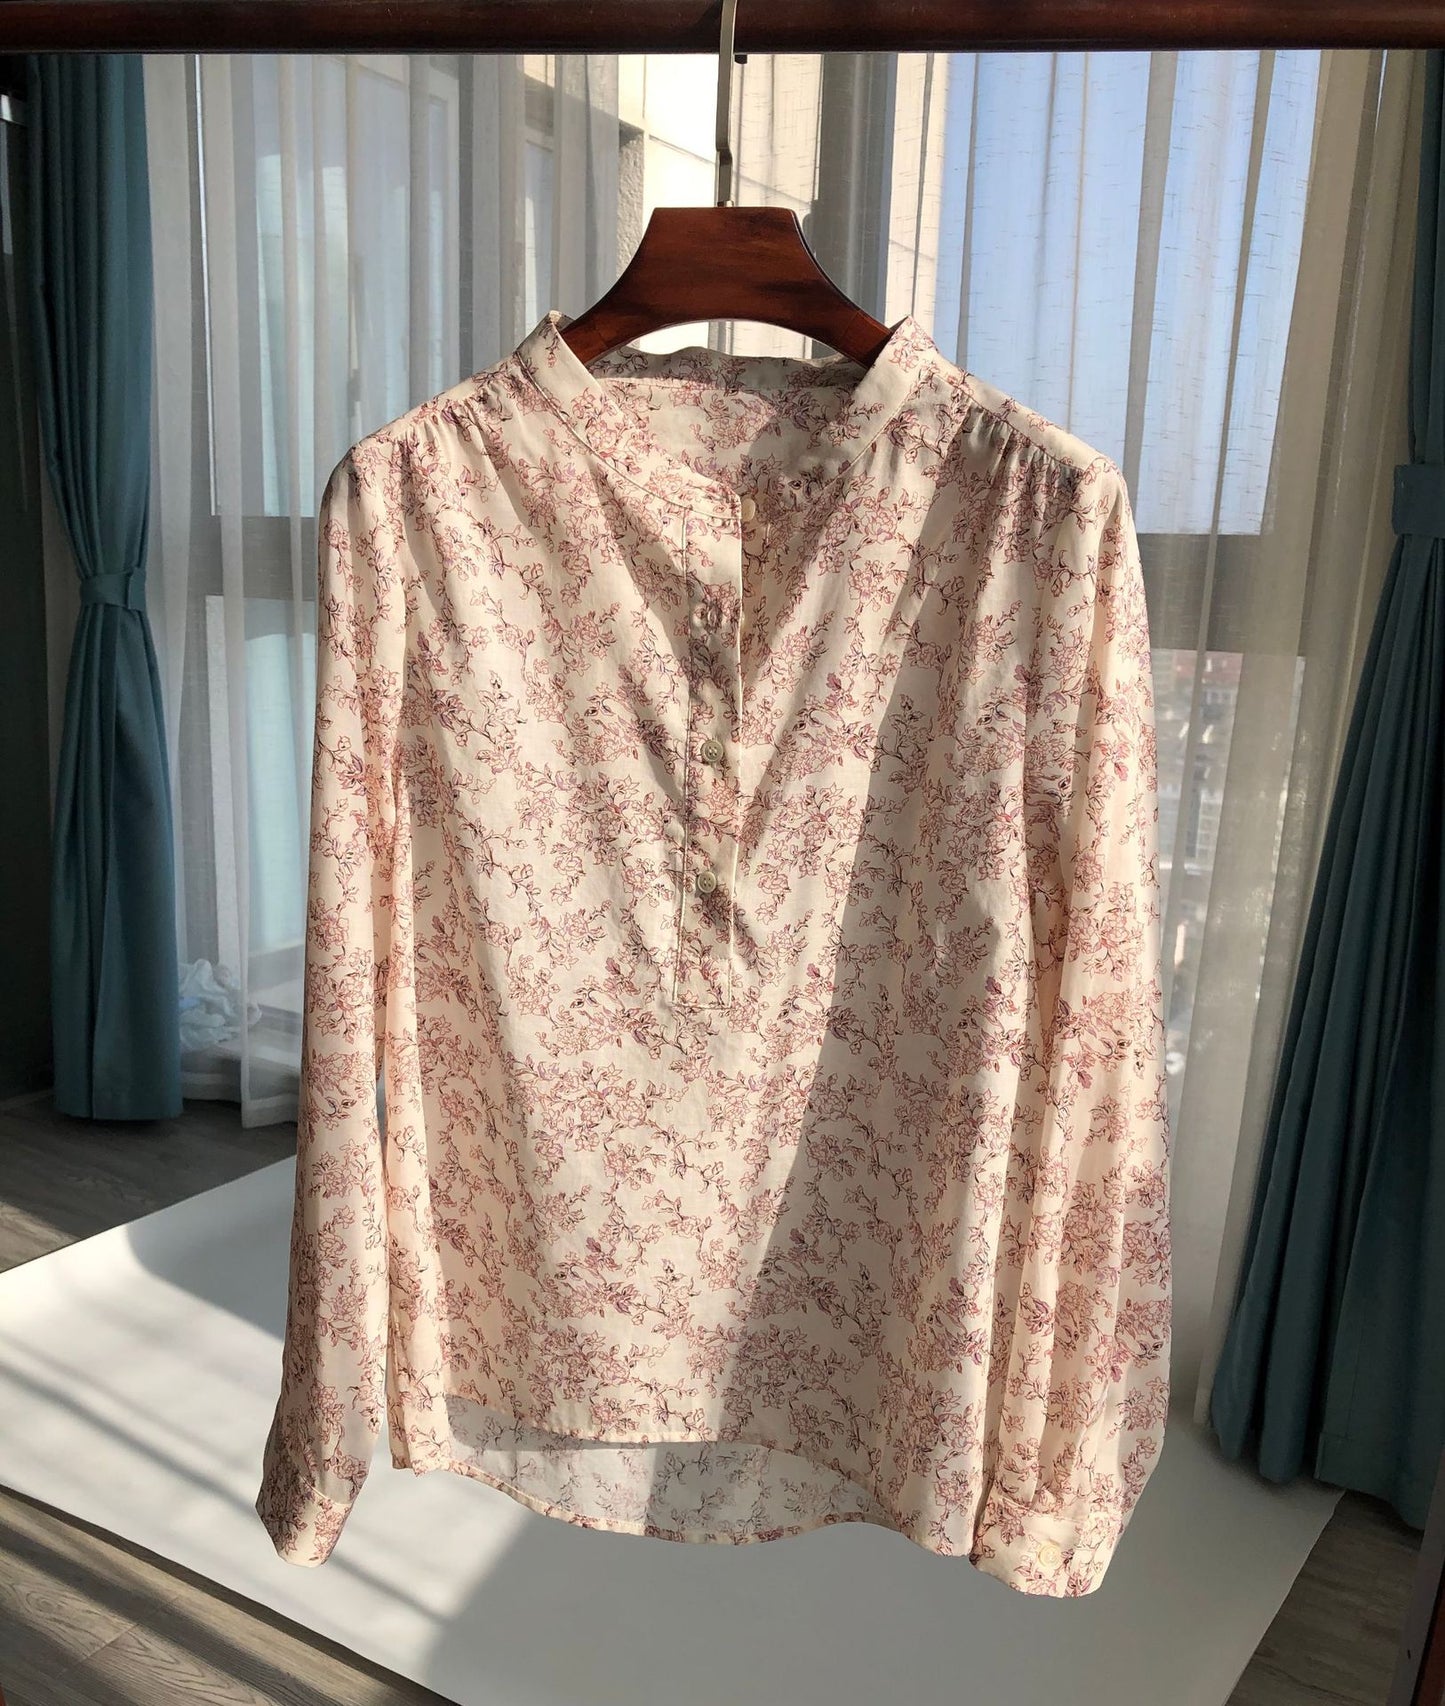 Vintage Ethnic Print Cotton Shirt with Half-Open Placket Long Sleeve Shirt